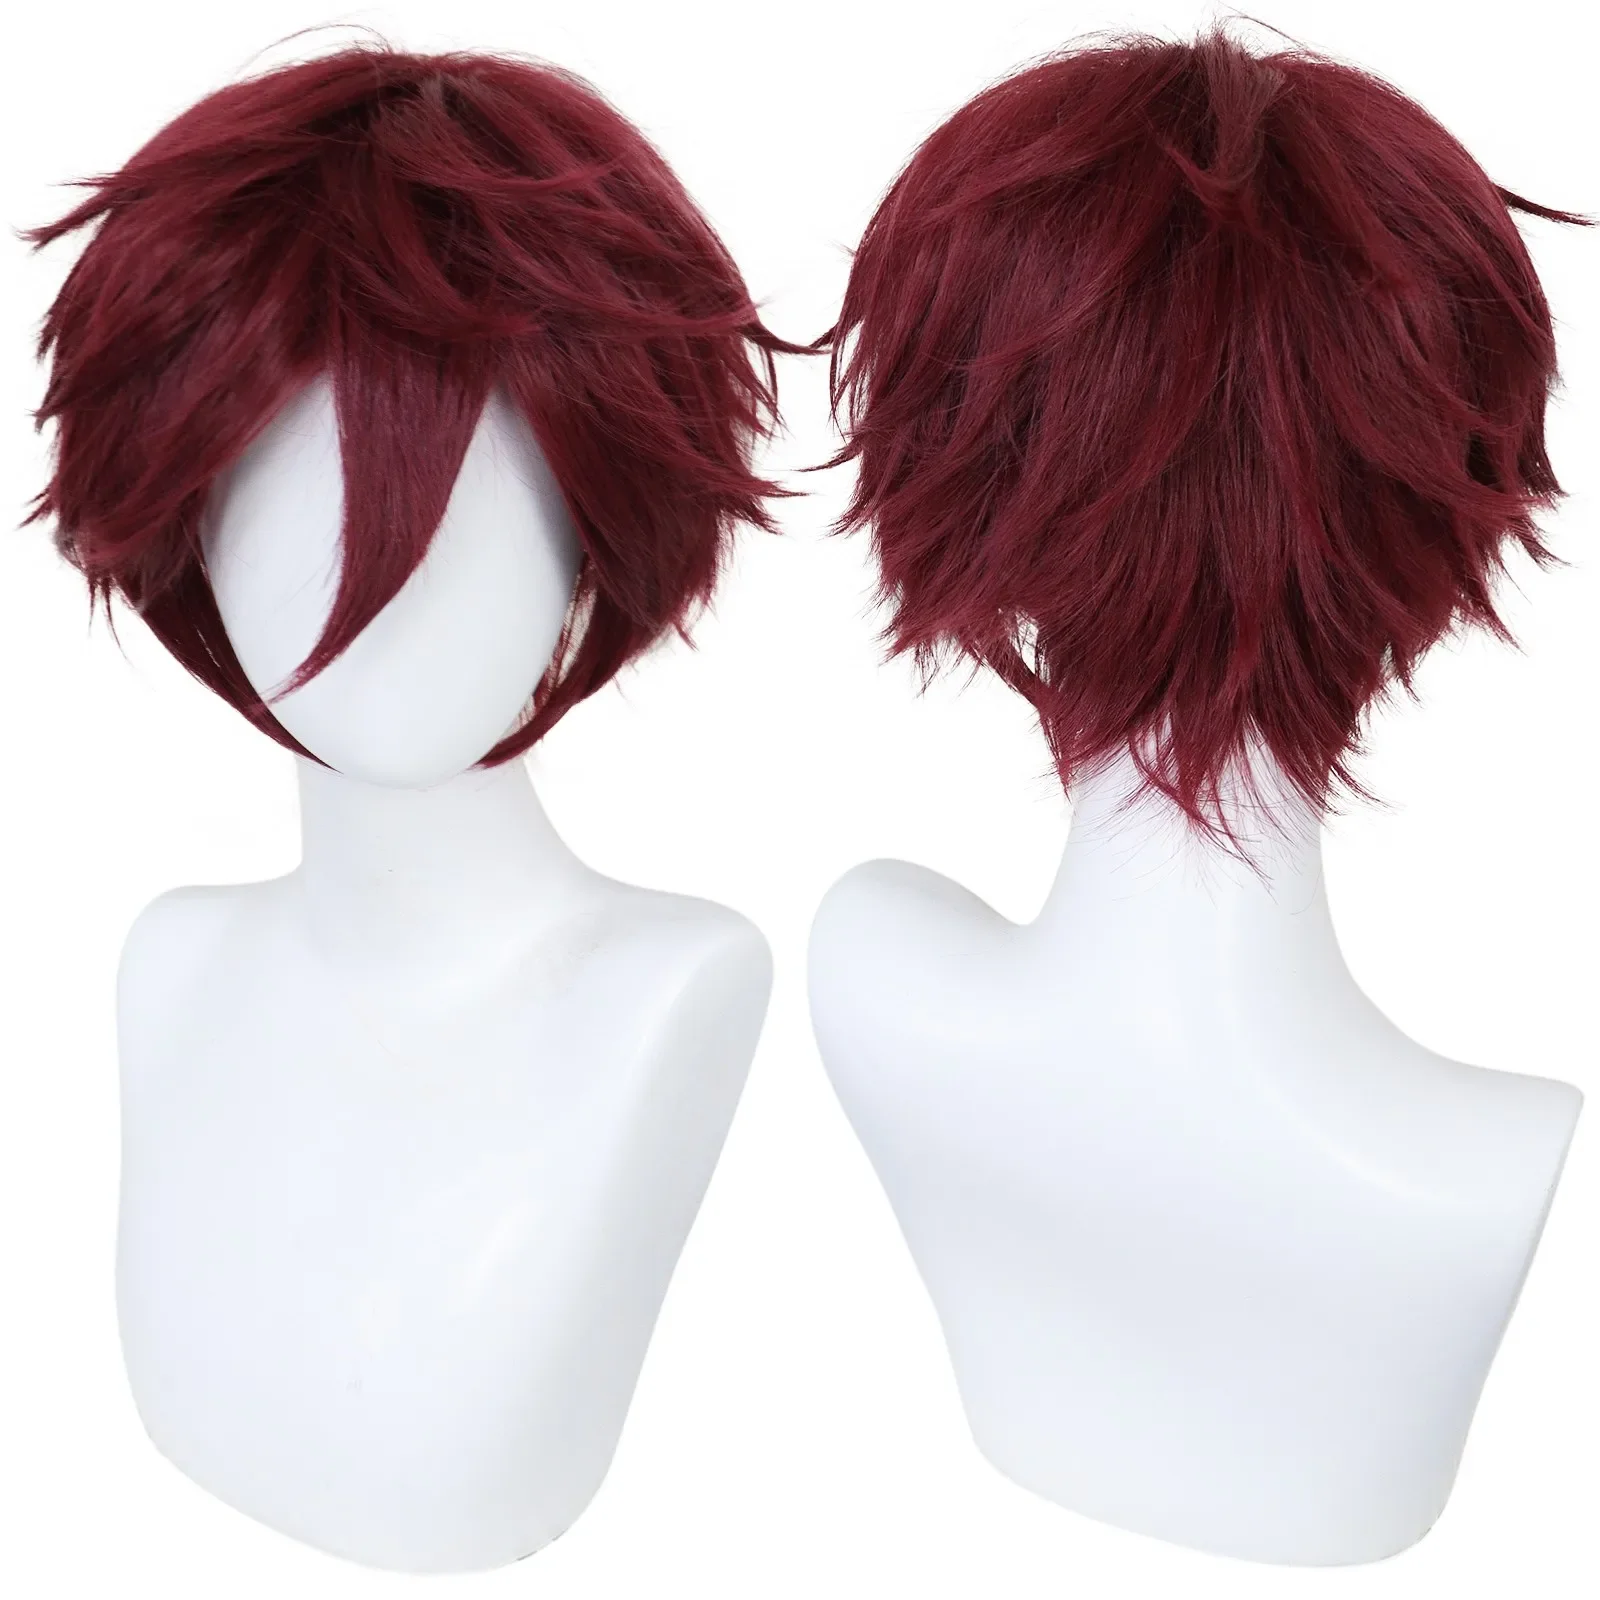 Short Multi-color Wine Red Pink Straight Universal Men's Wig for Halloween Event Cosplay Costume Party